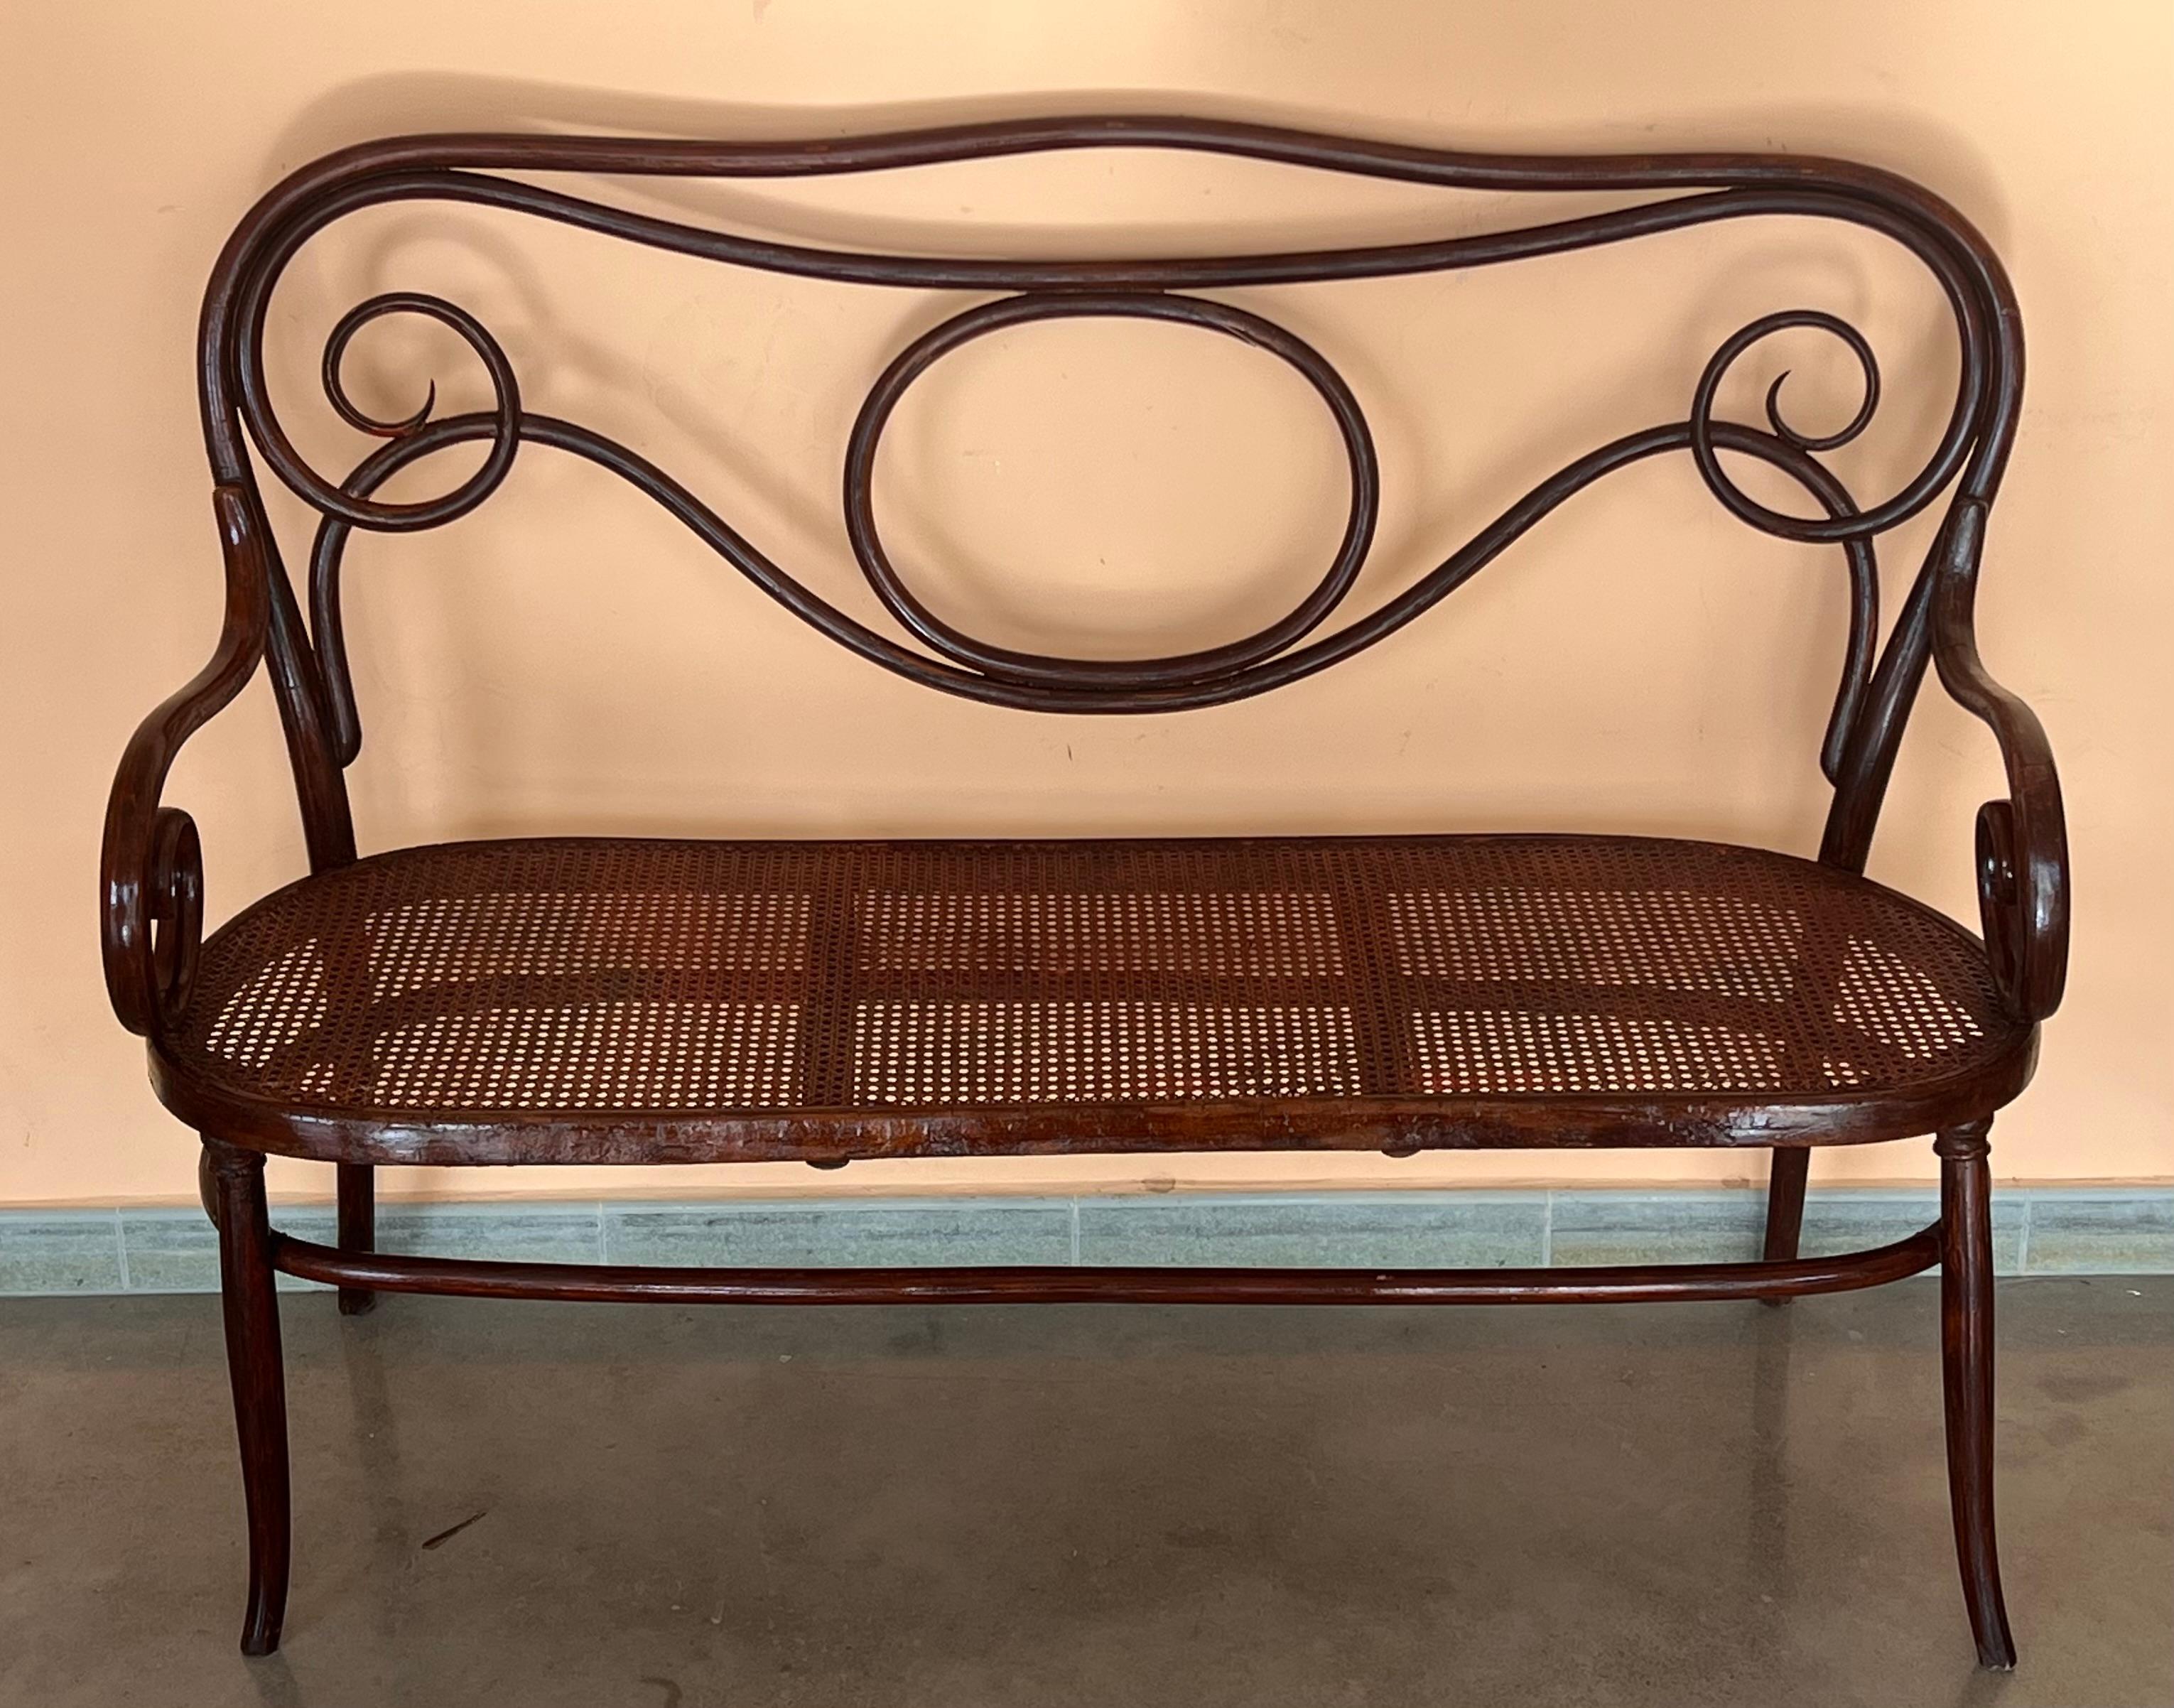 Spanish 20th Century Bentwood Sofa signed by Fischel, circa 1900, Caned Seat